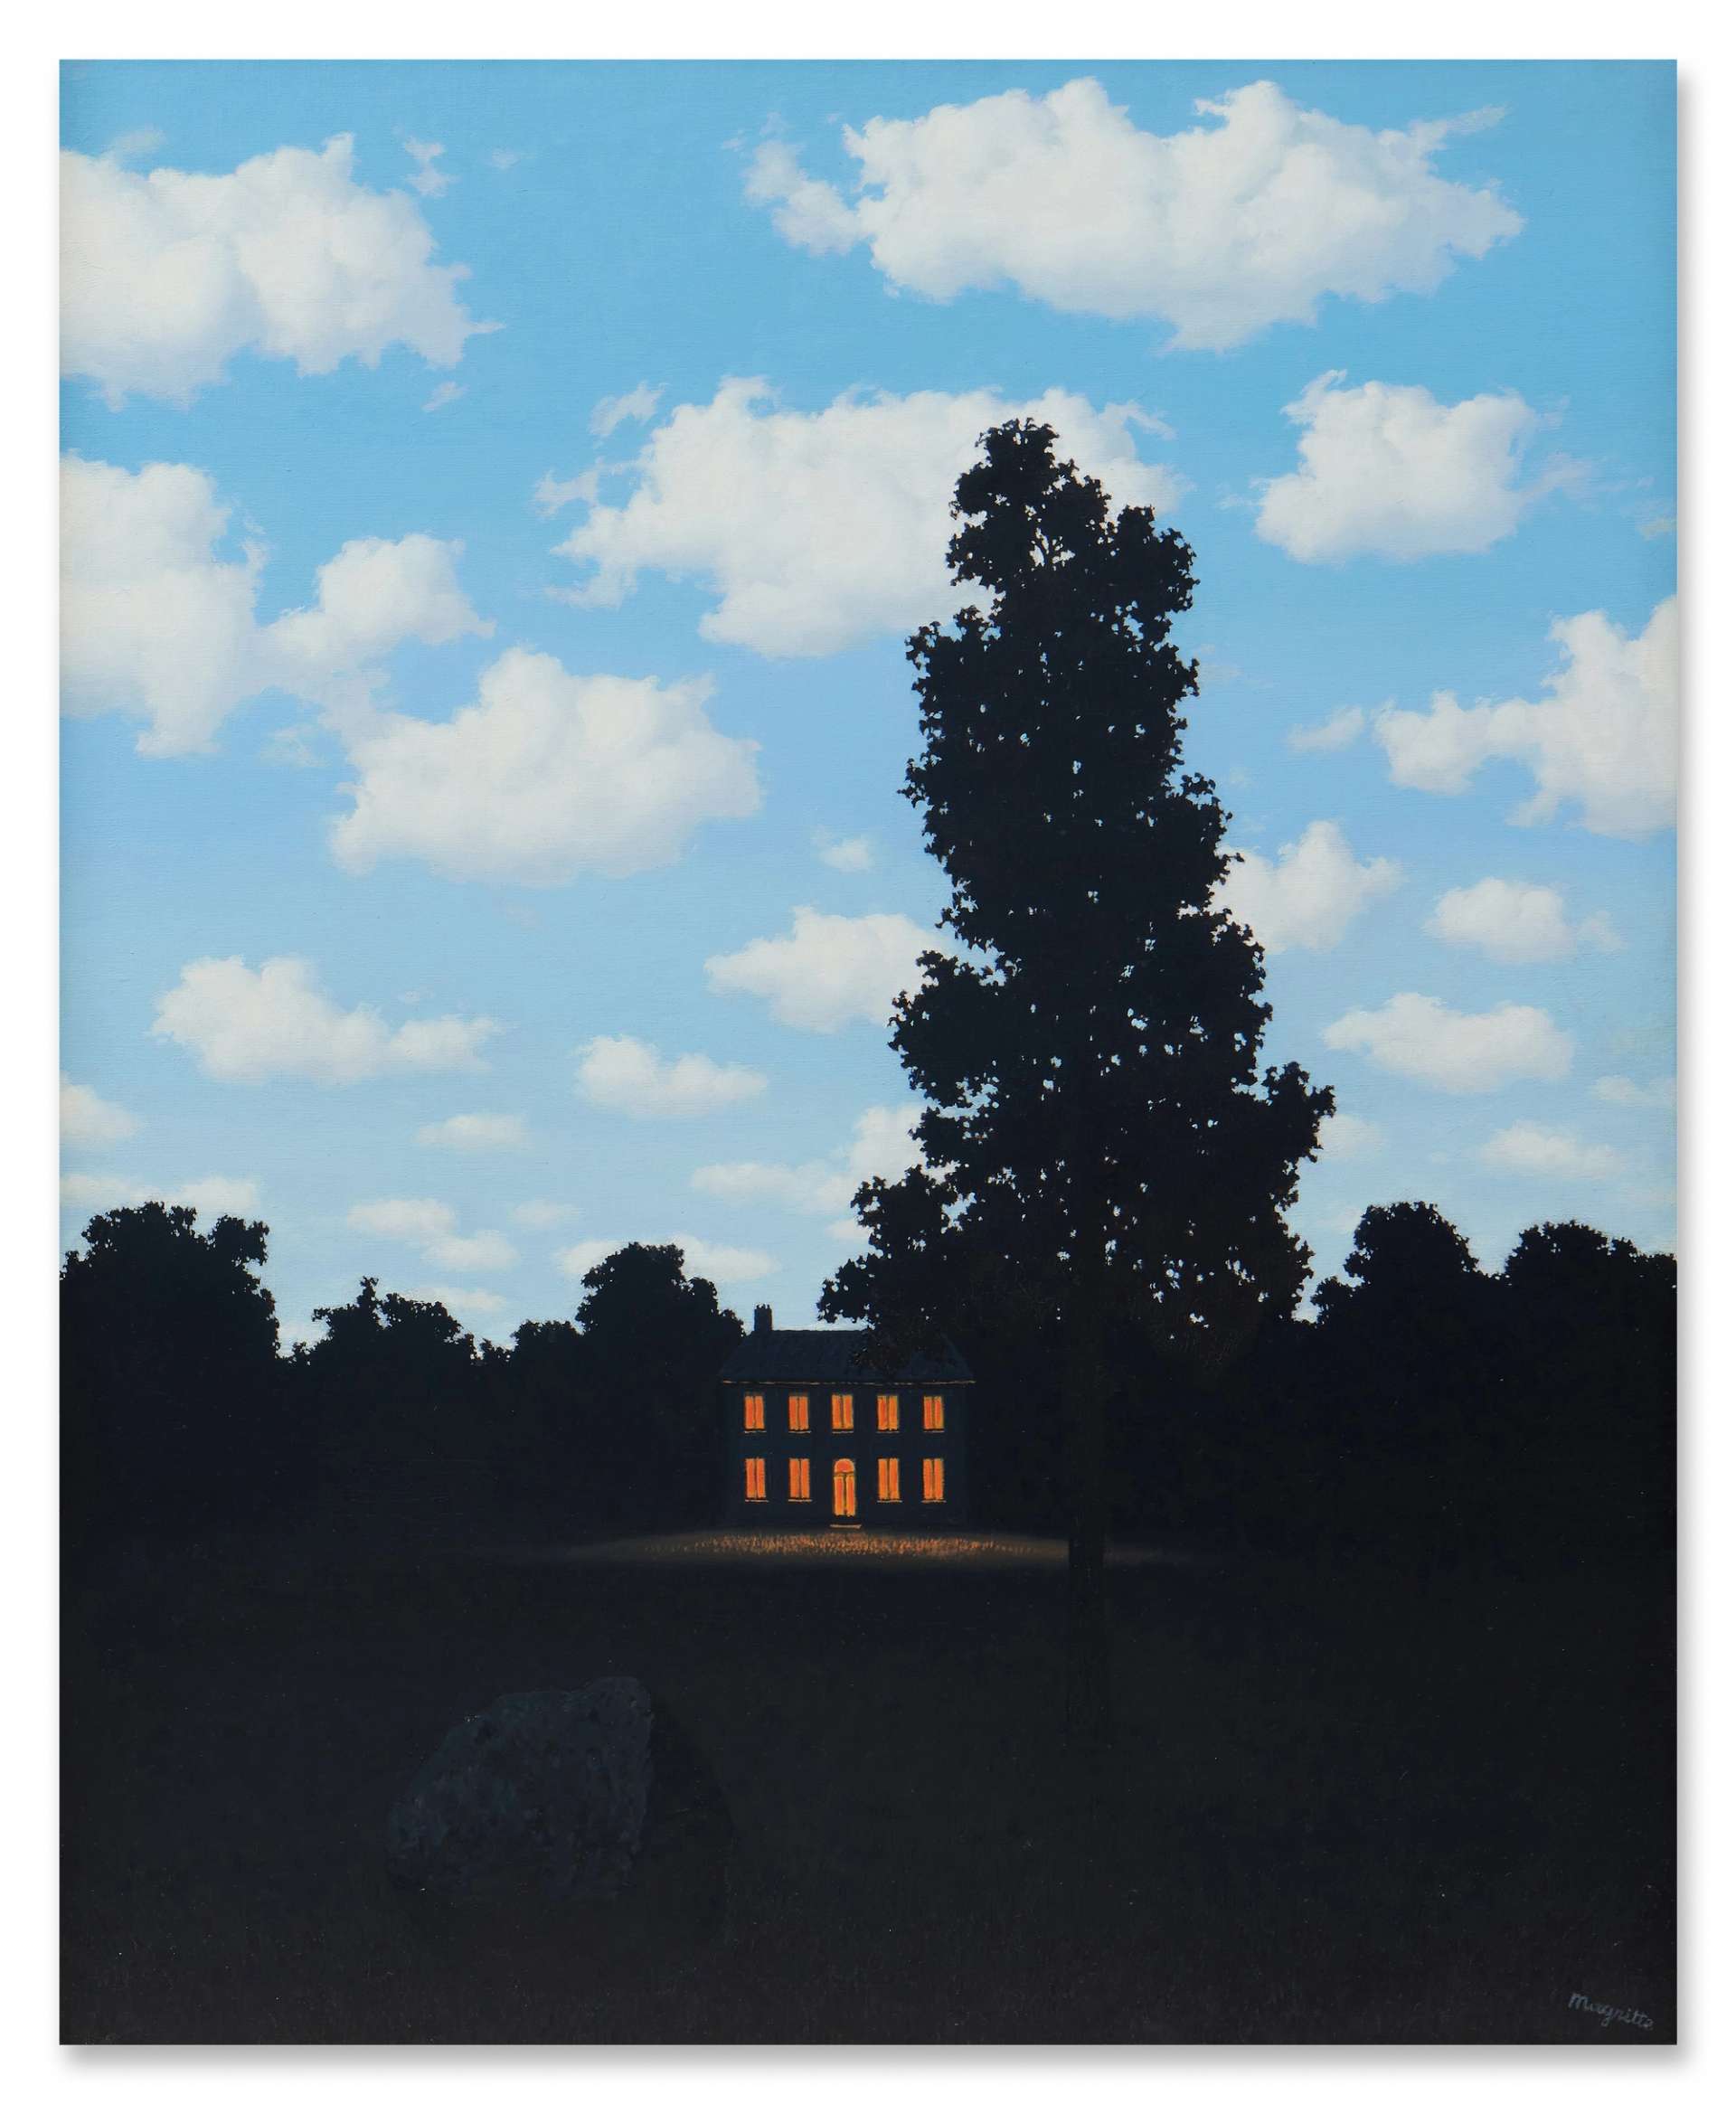 A painting of a large house by René Magritte positioned in the distance of a vast field, framed by towering trees. The field is depicted in dark shades while the sky is painted in light blue tones with white clouds. The house’s windows emit an orange glow creating a nighttime ambiance. 